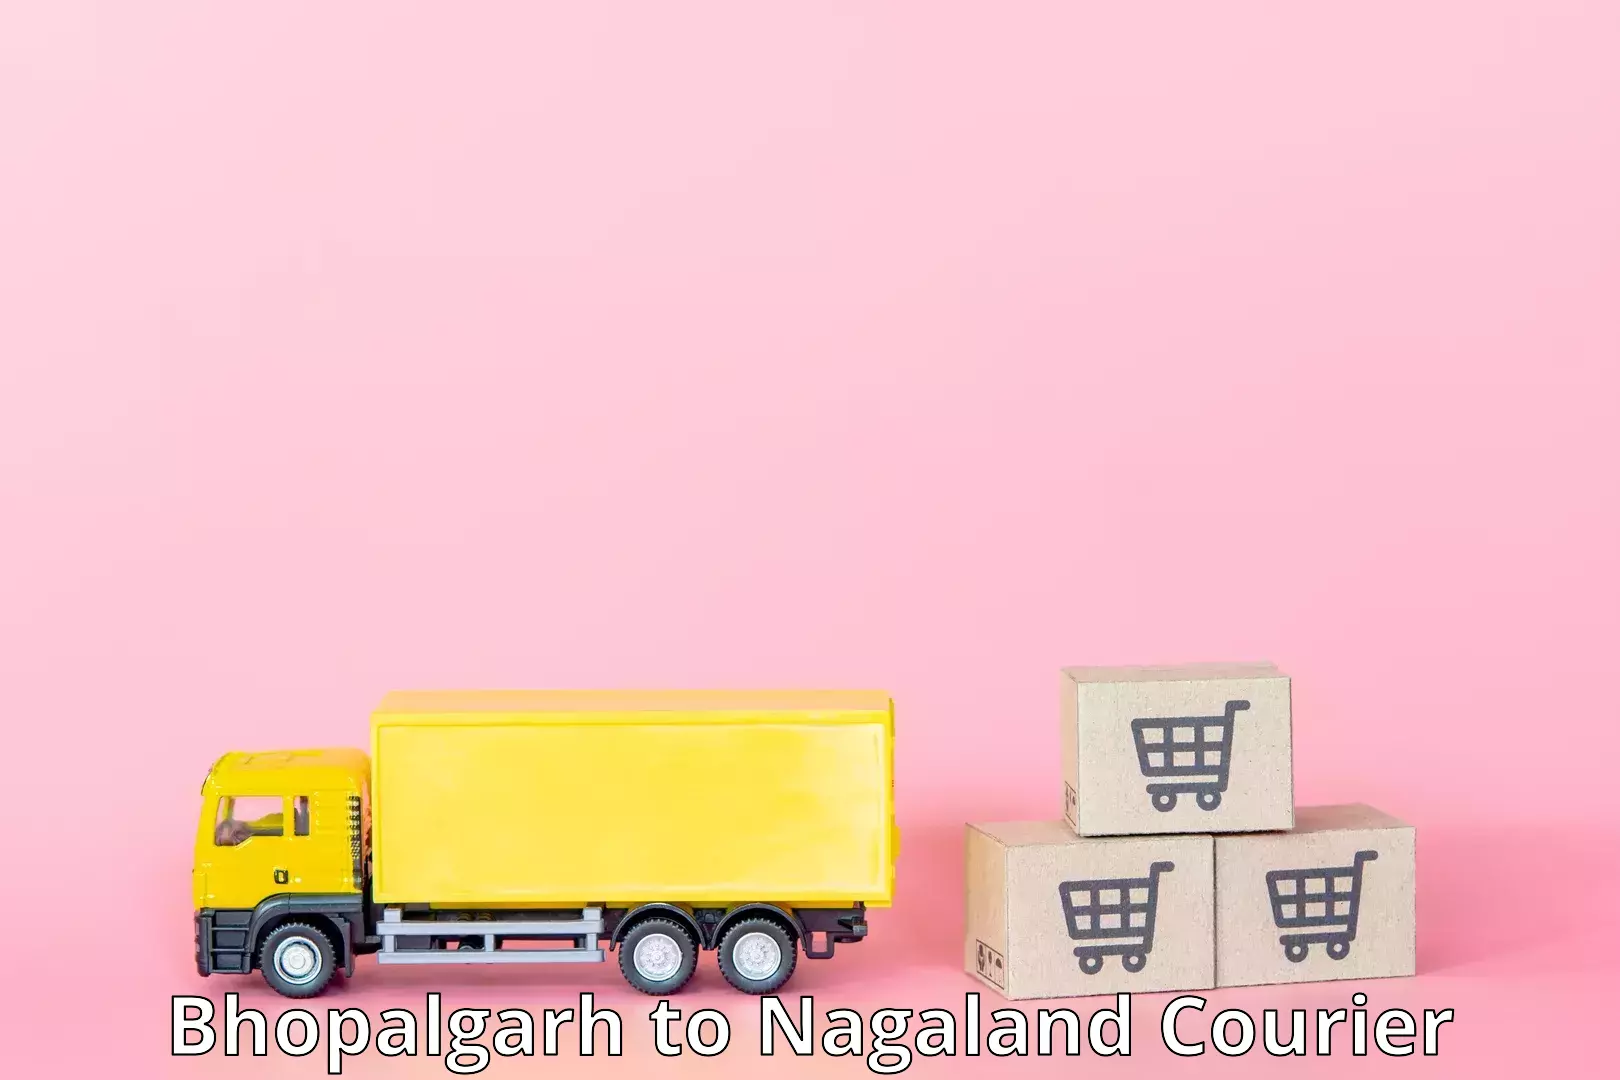 User-friendly delivery service Bhopalgarh to Nagaland